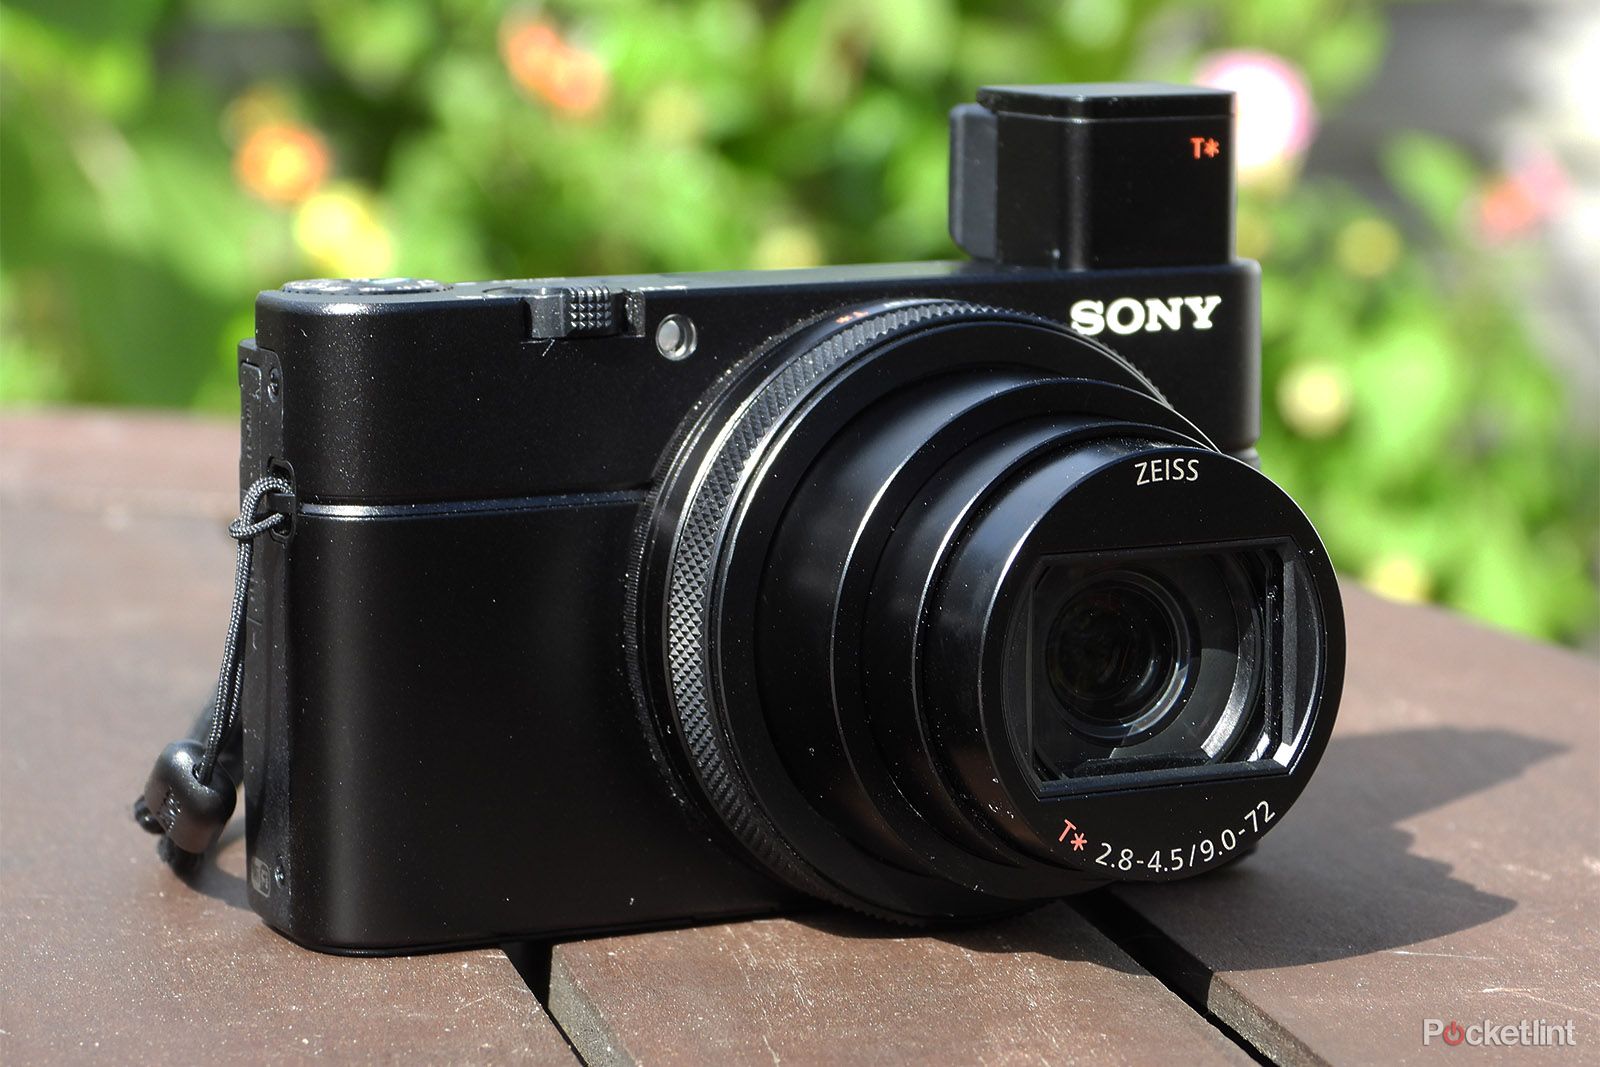 Sony Cyber-shot RX100 VI review image 1